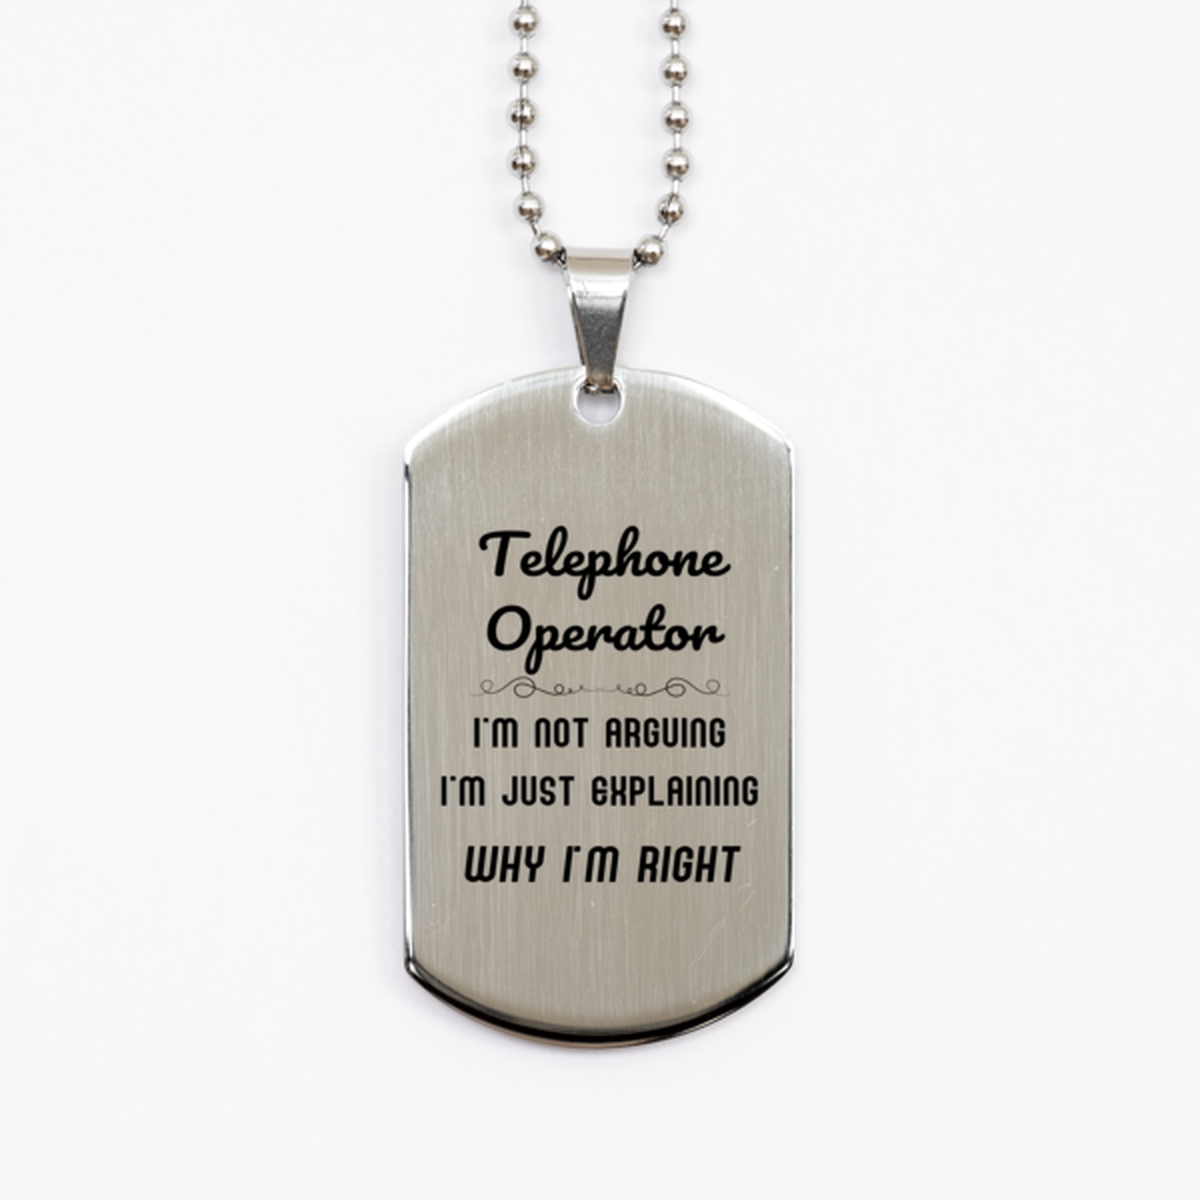 Telephone Operator I'm not Arguing. I'm Just Explaining Why I'm RIGHT Silver Dog Tag, Funny Saying Quote Telephone Operator Gifts For Telephone Operator Graduation Birthday Christmas Gifts for Men Women Coworker